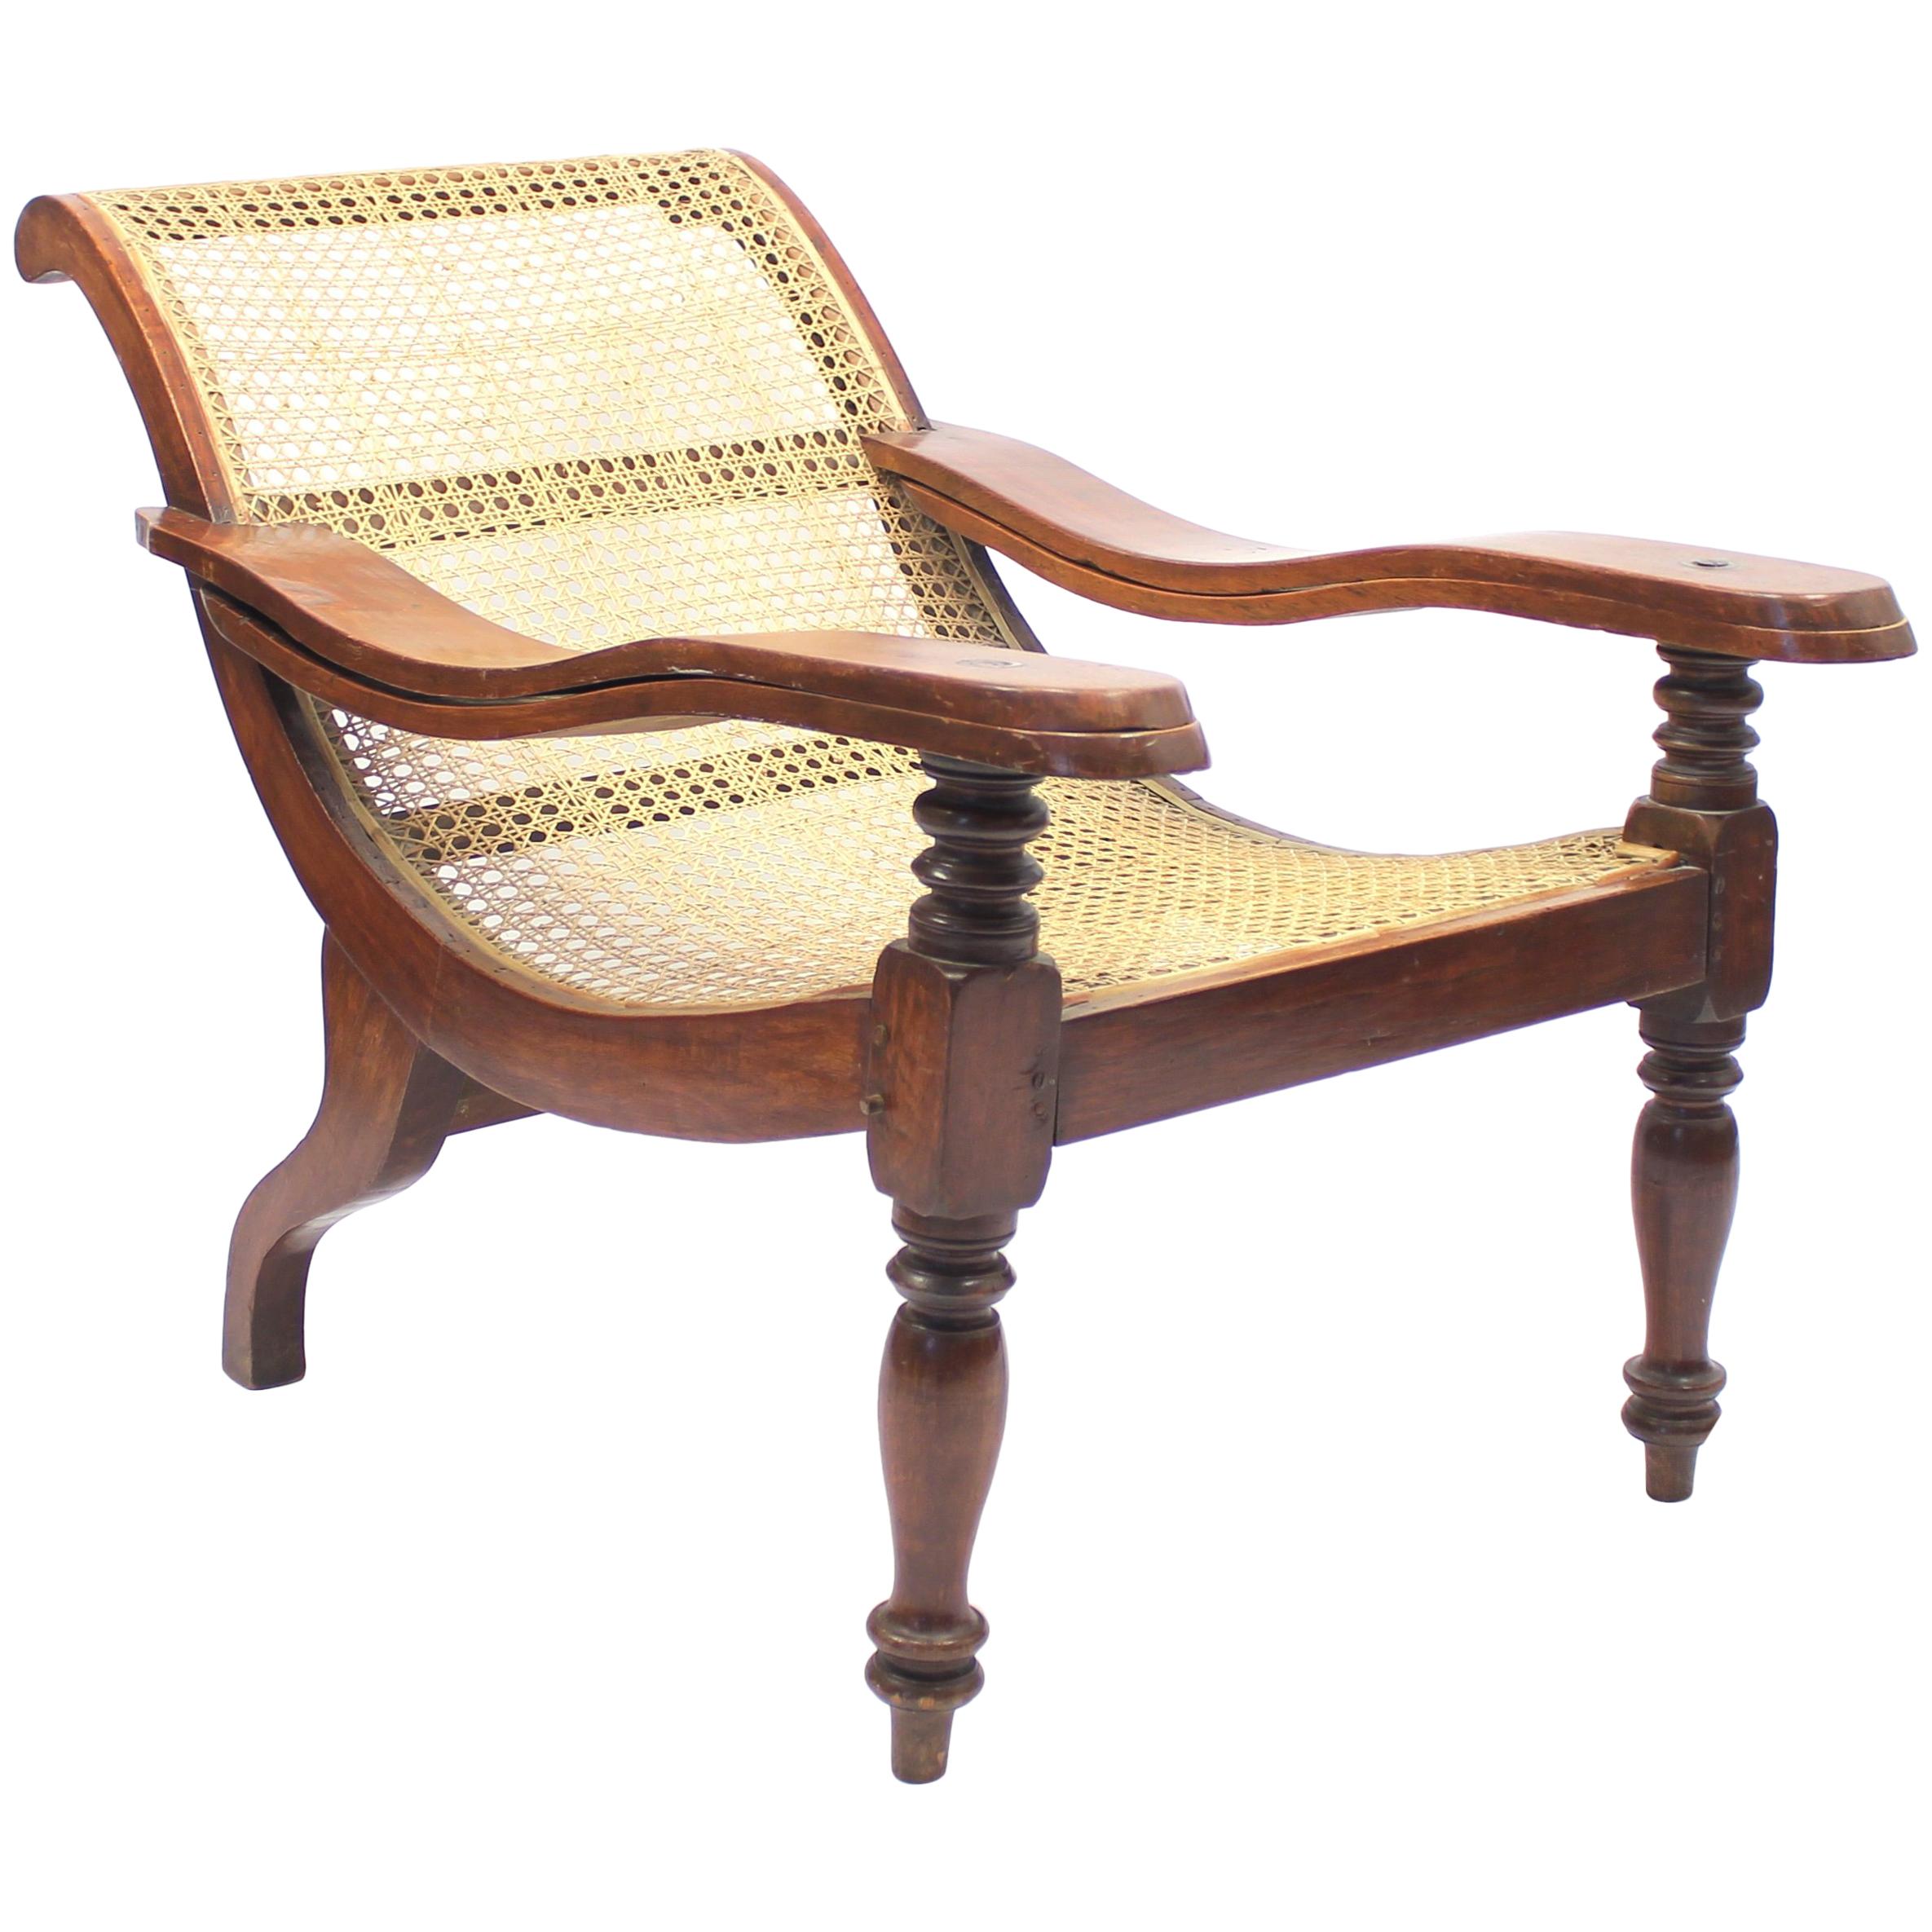 Antique Colonial Plantation Chair with Rattan Seat, Late 19th Century